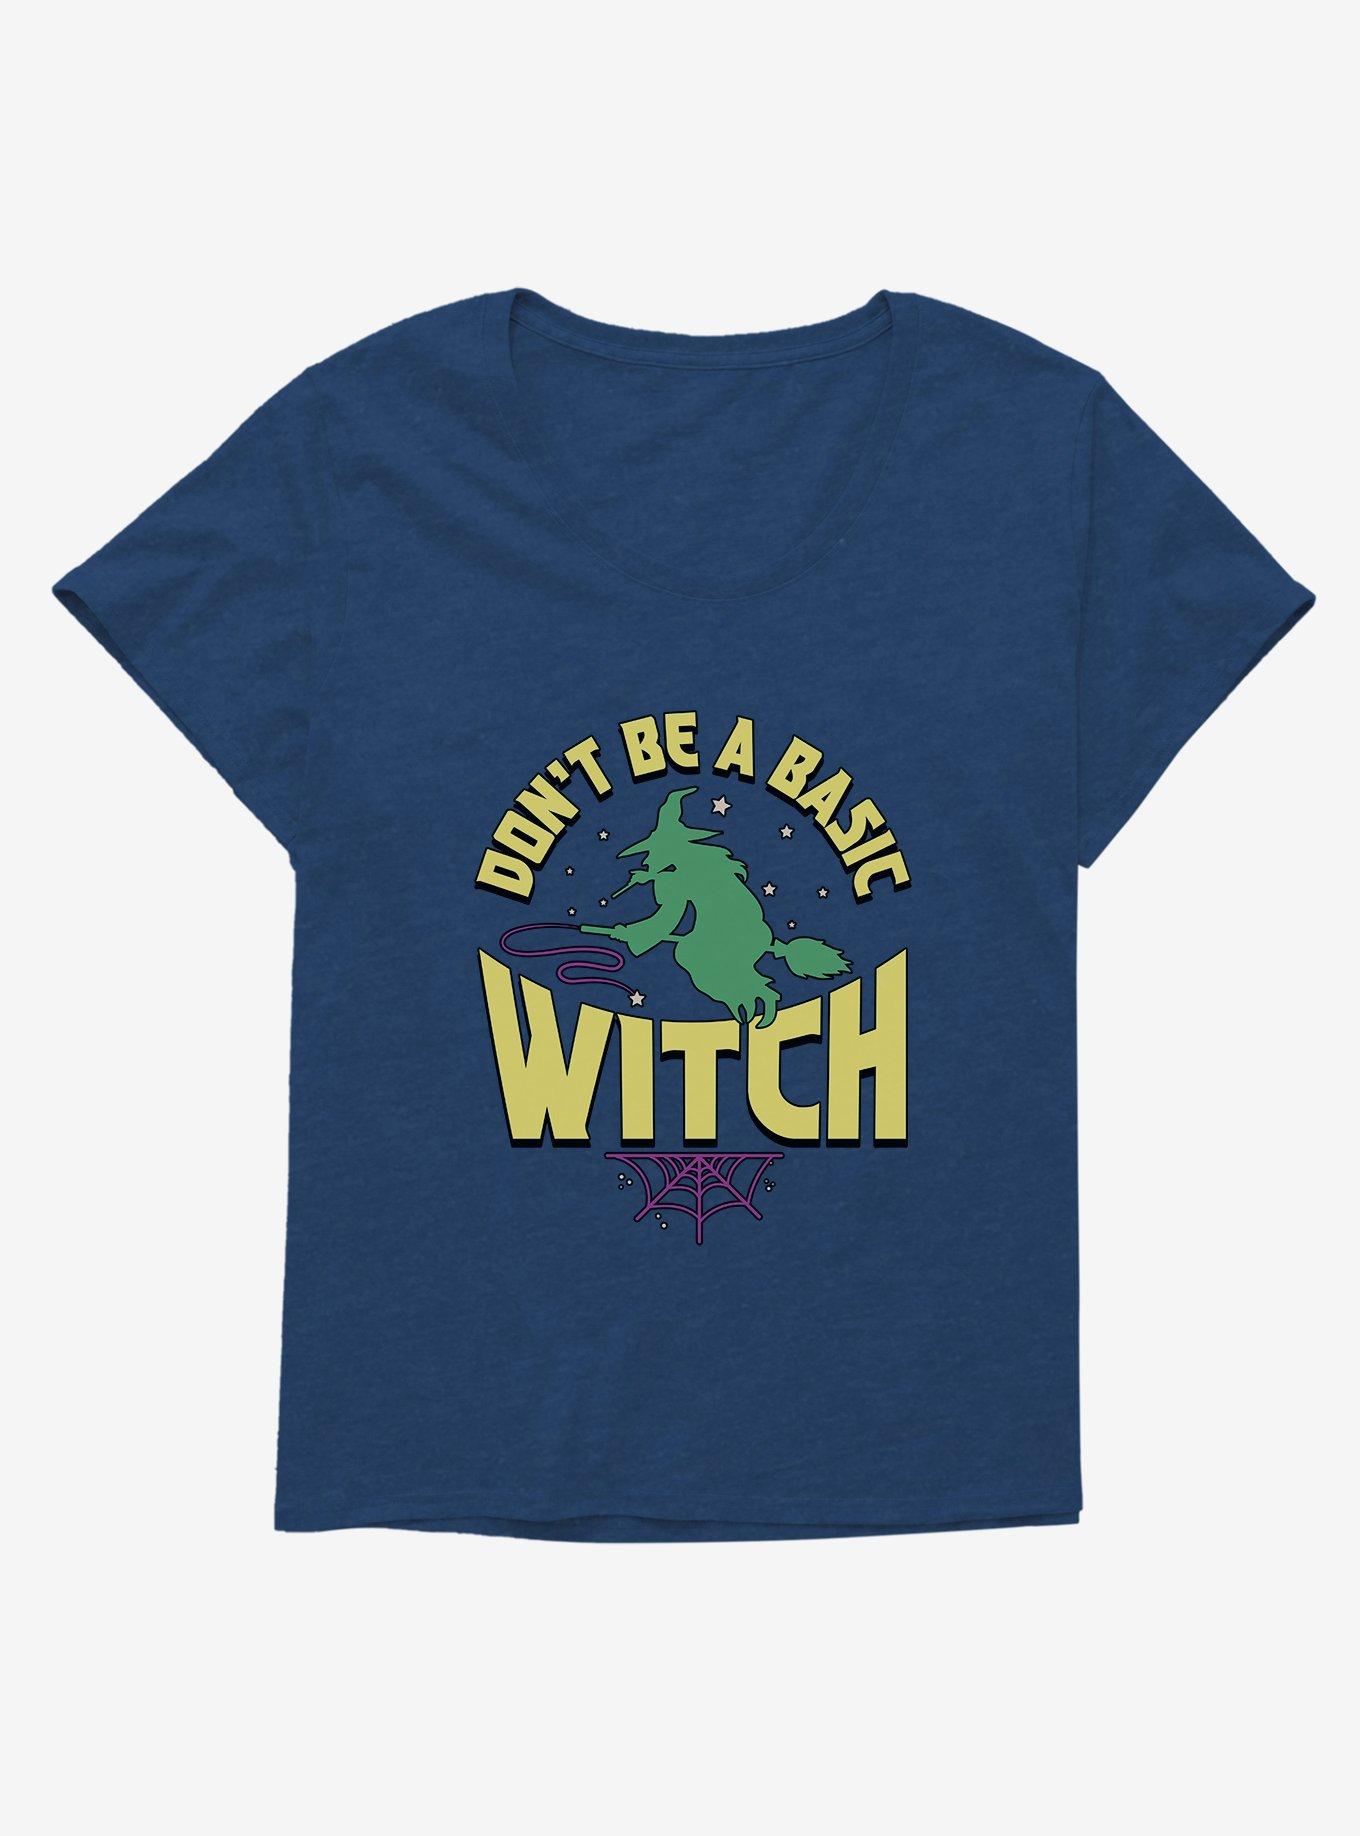 Halloween Basic Witch Plus Size T-Shirt, ATHLETIC NAVY, hi-res